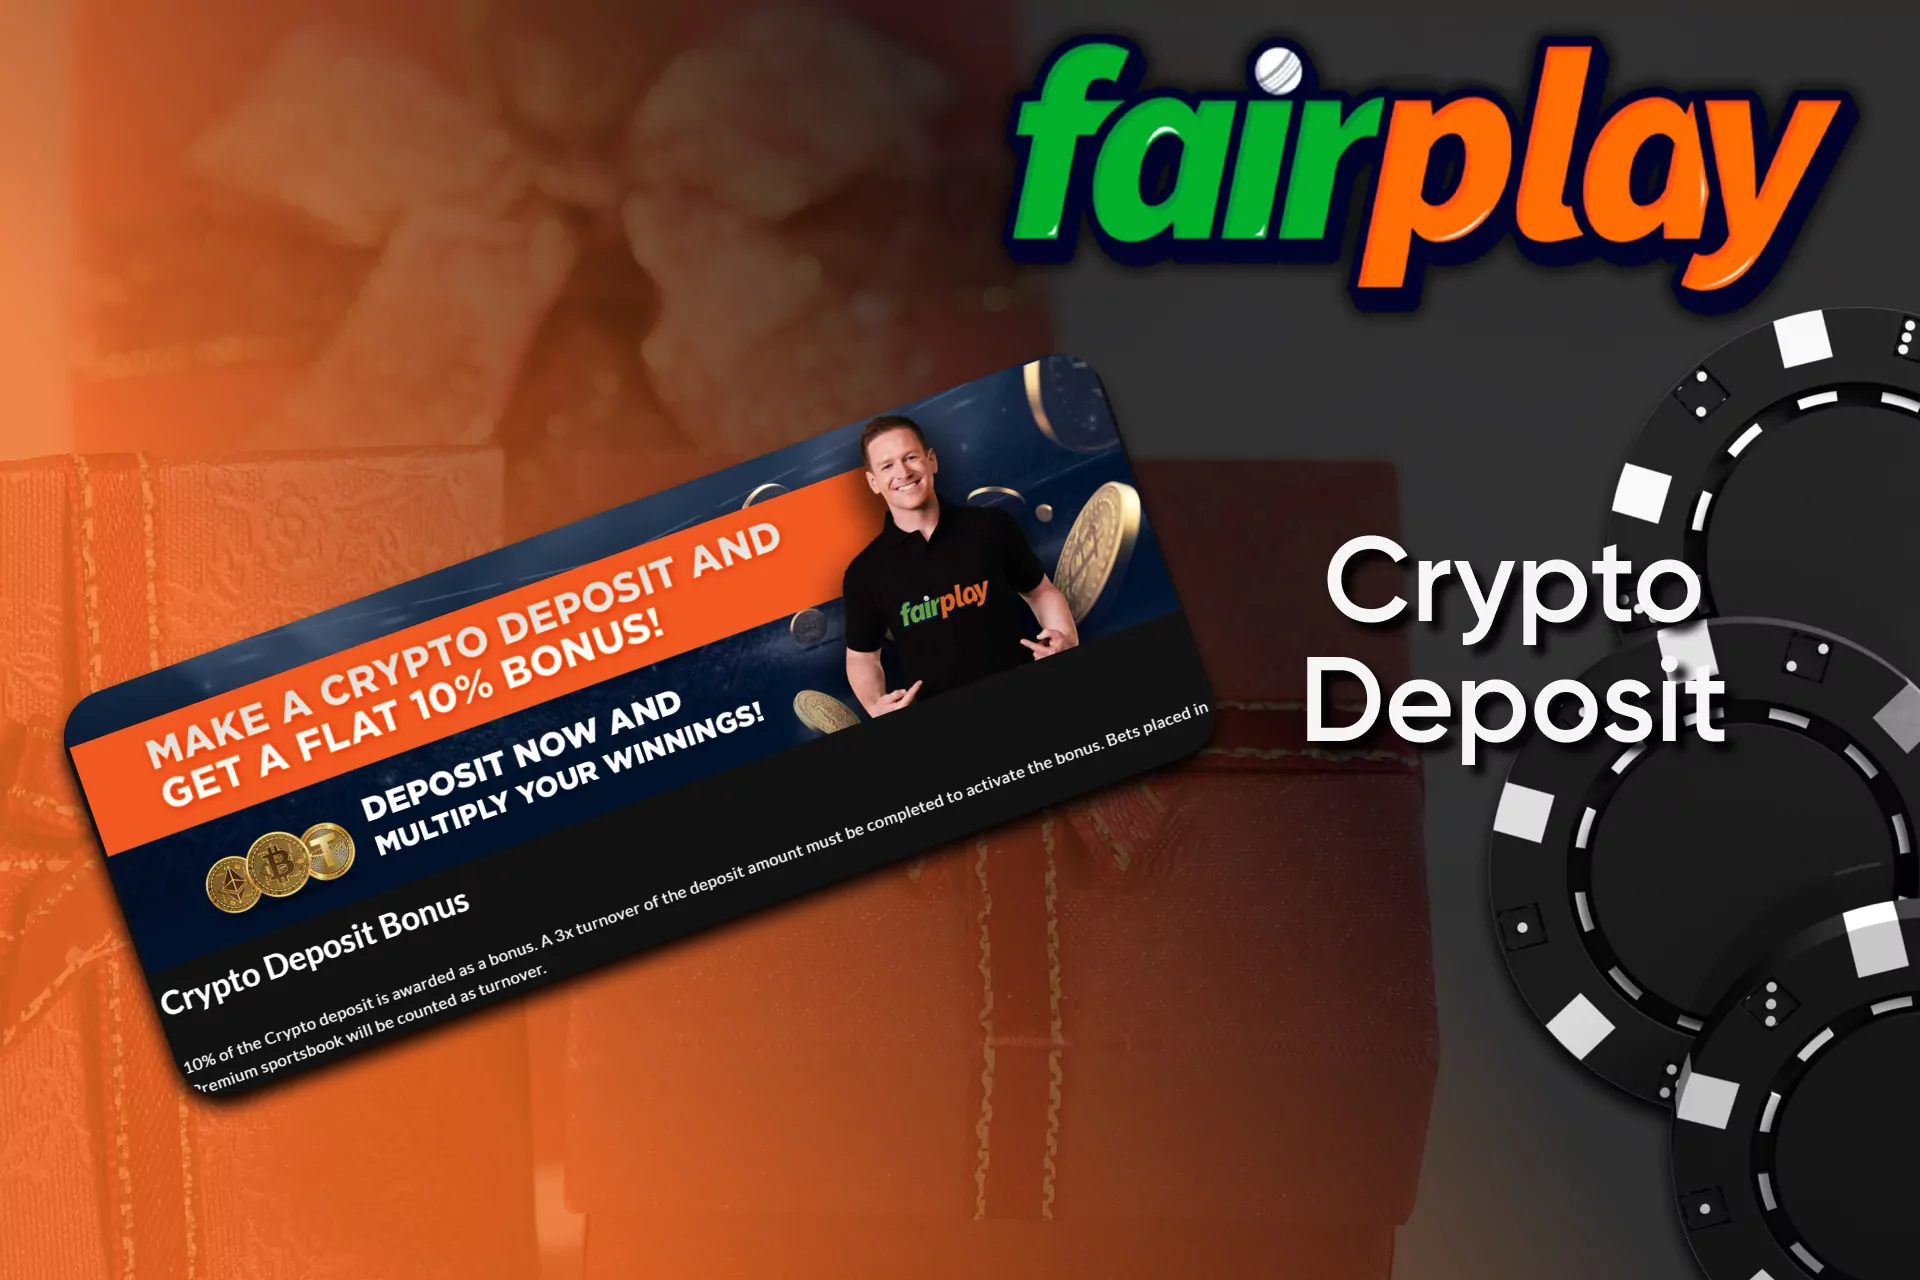 Top up an account on Fairplay with crypto to get an additional bonus from the bookie.